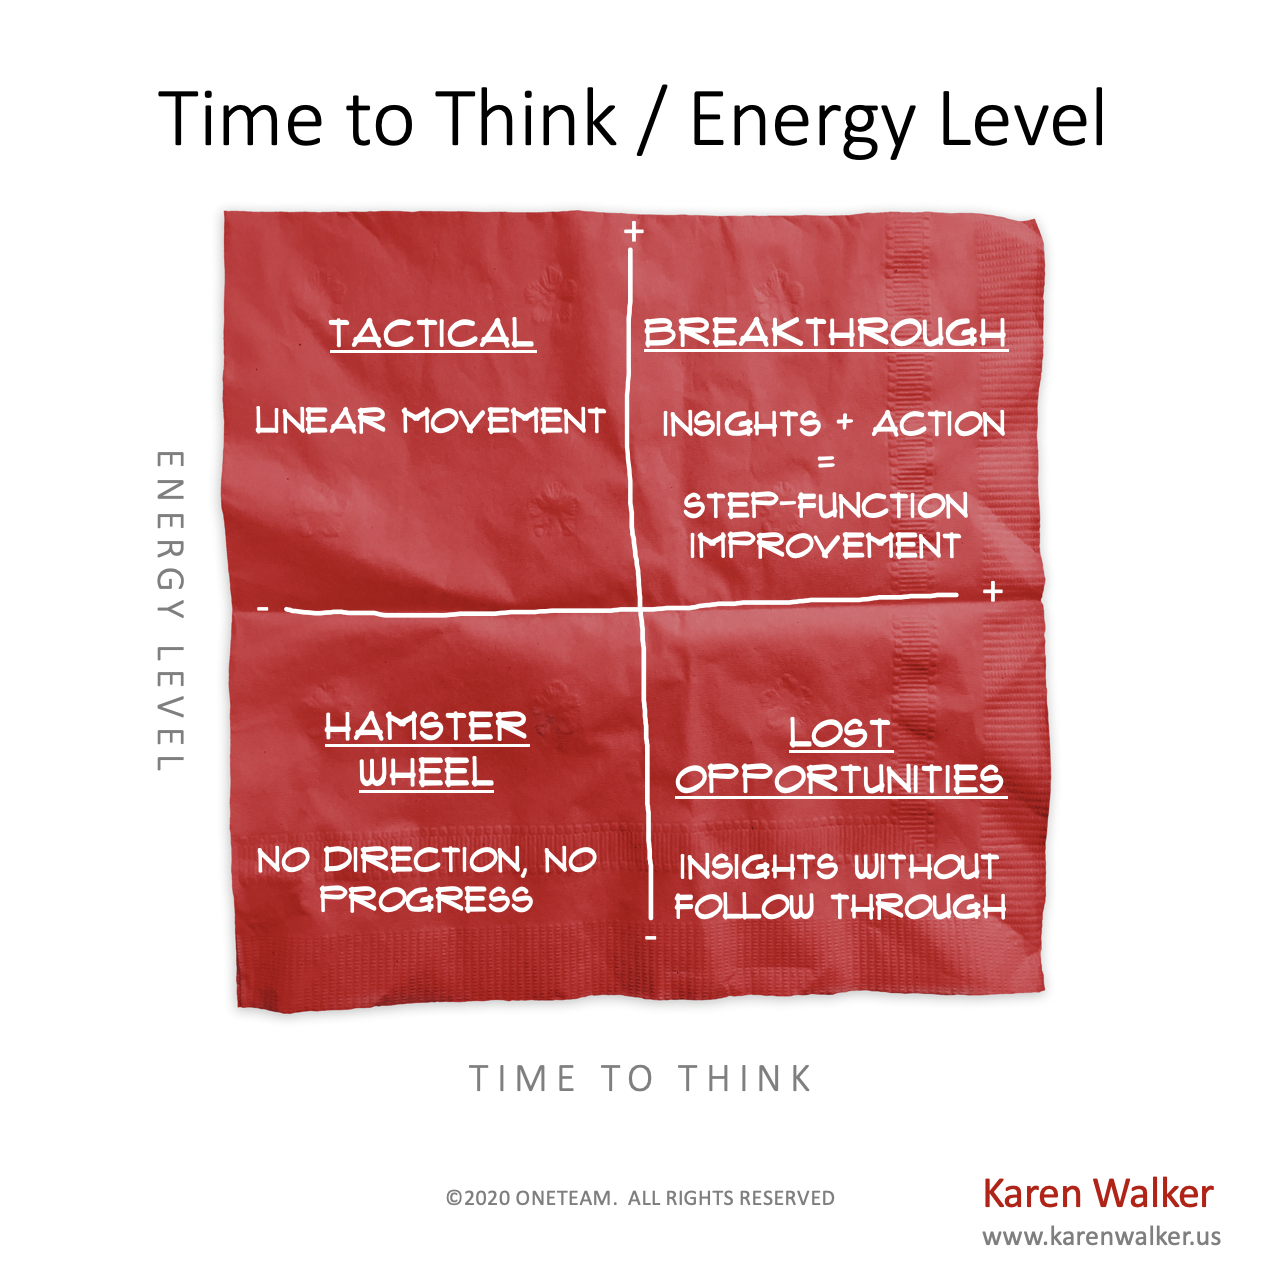 Why we are sometimes on a hamster wheel, and sometimes having break though moments. - Click for the two-minute video: Time to Think / Energy Level